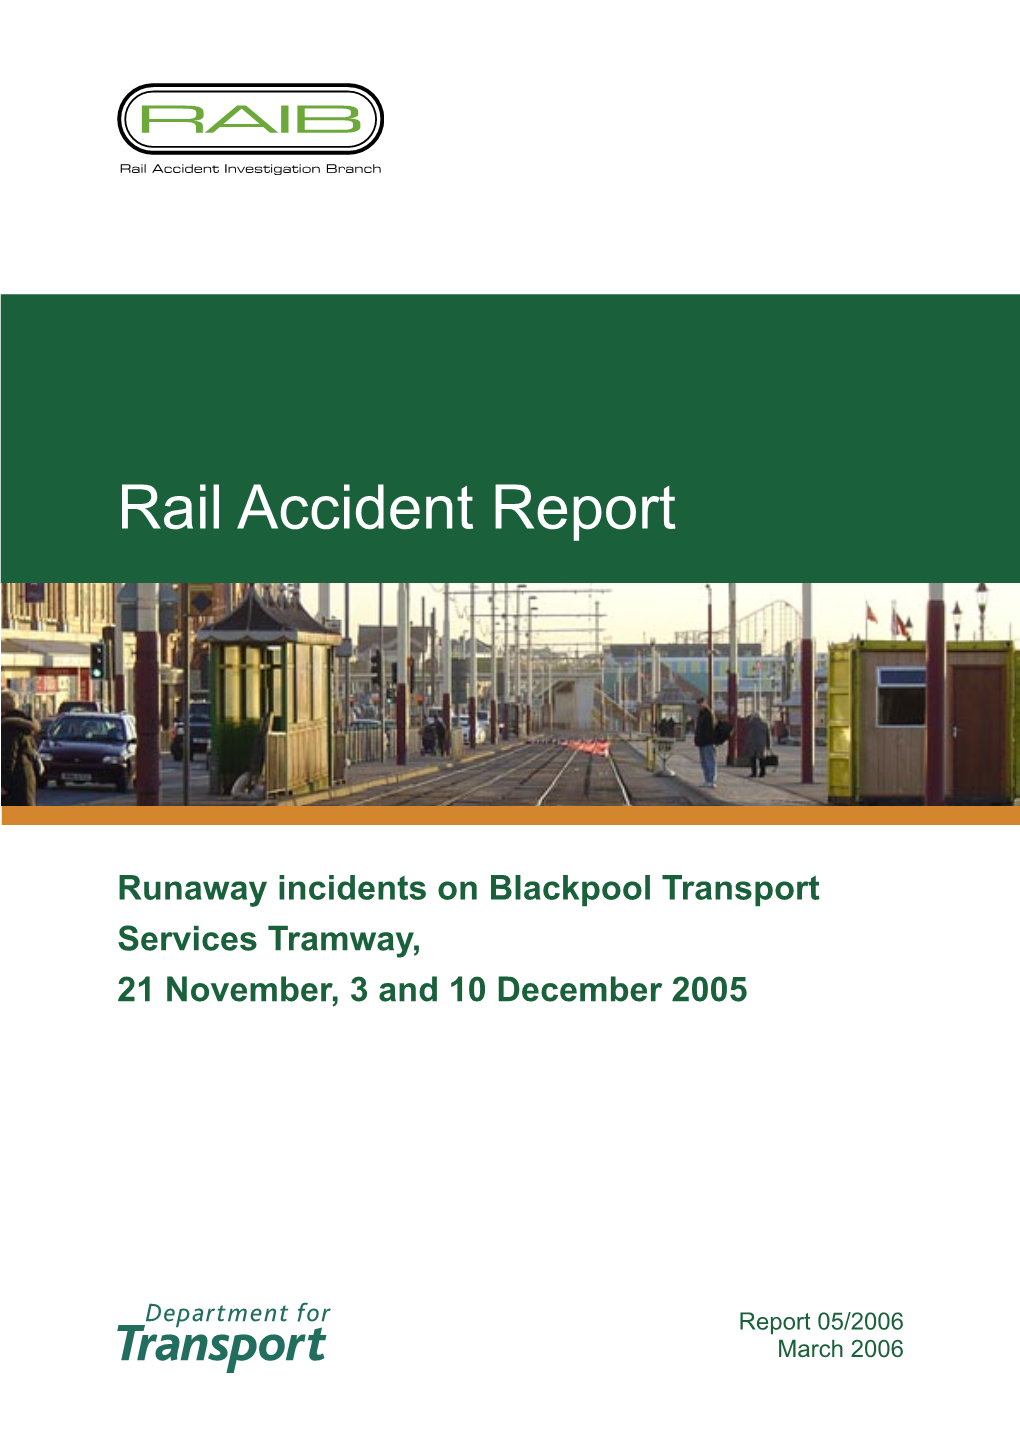 Blackpool Tramway on 21 November and 3 and 10 December 2005 in Which Trams Ran Away Or Failed to Stop When They Should Have Done